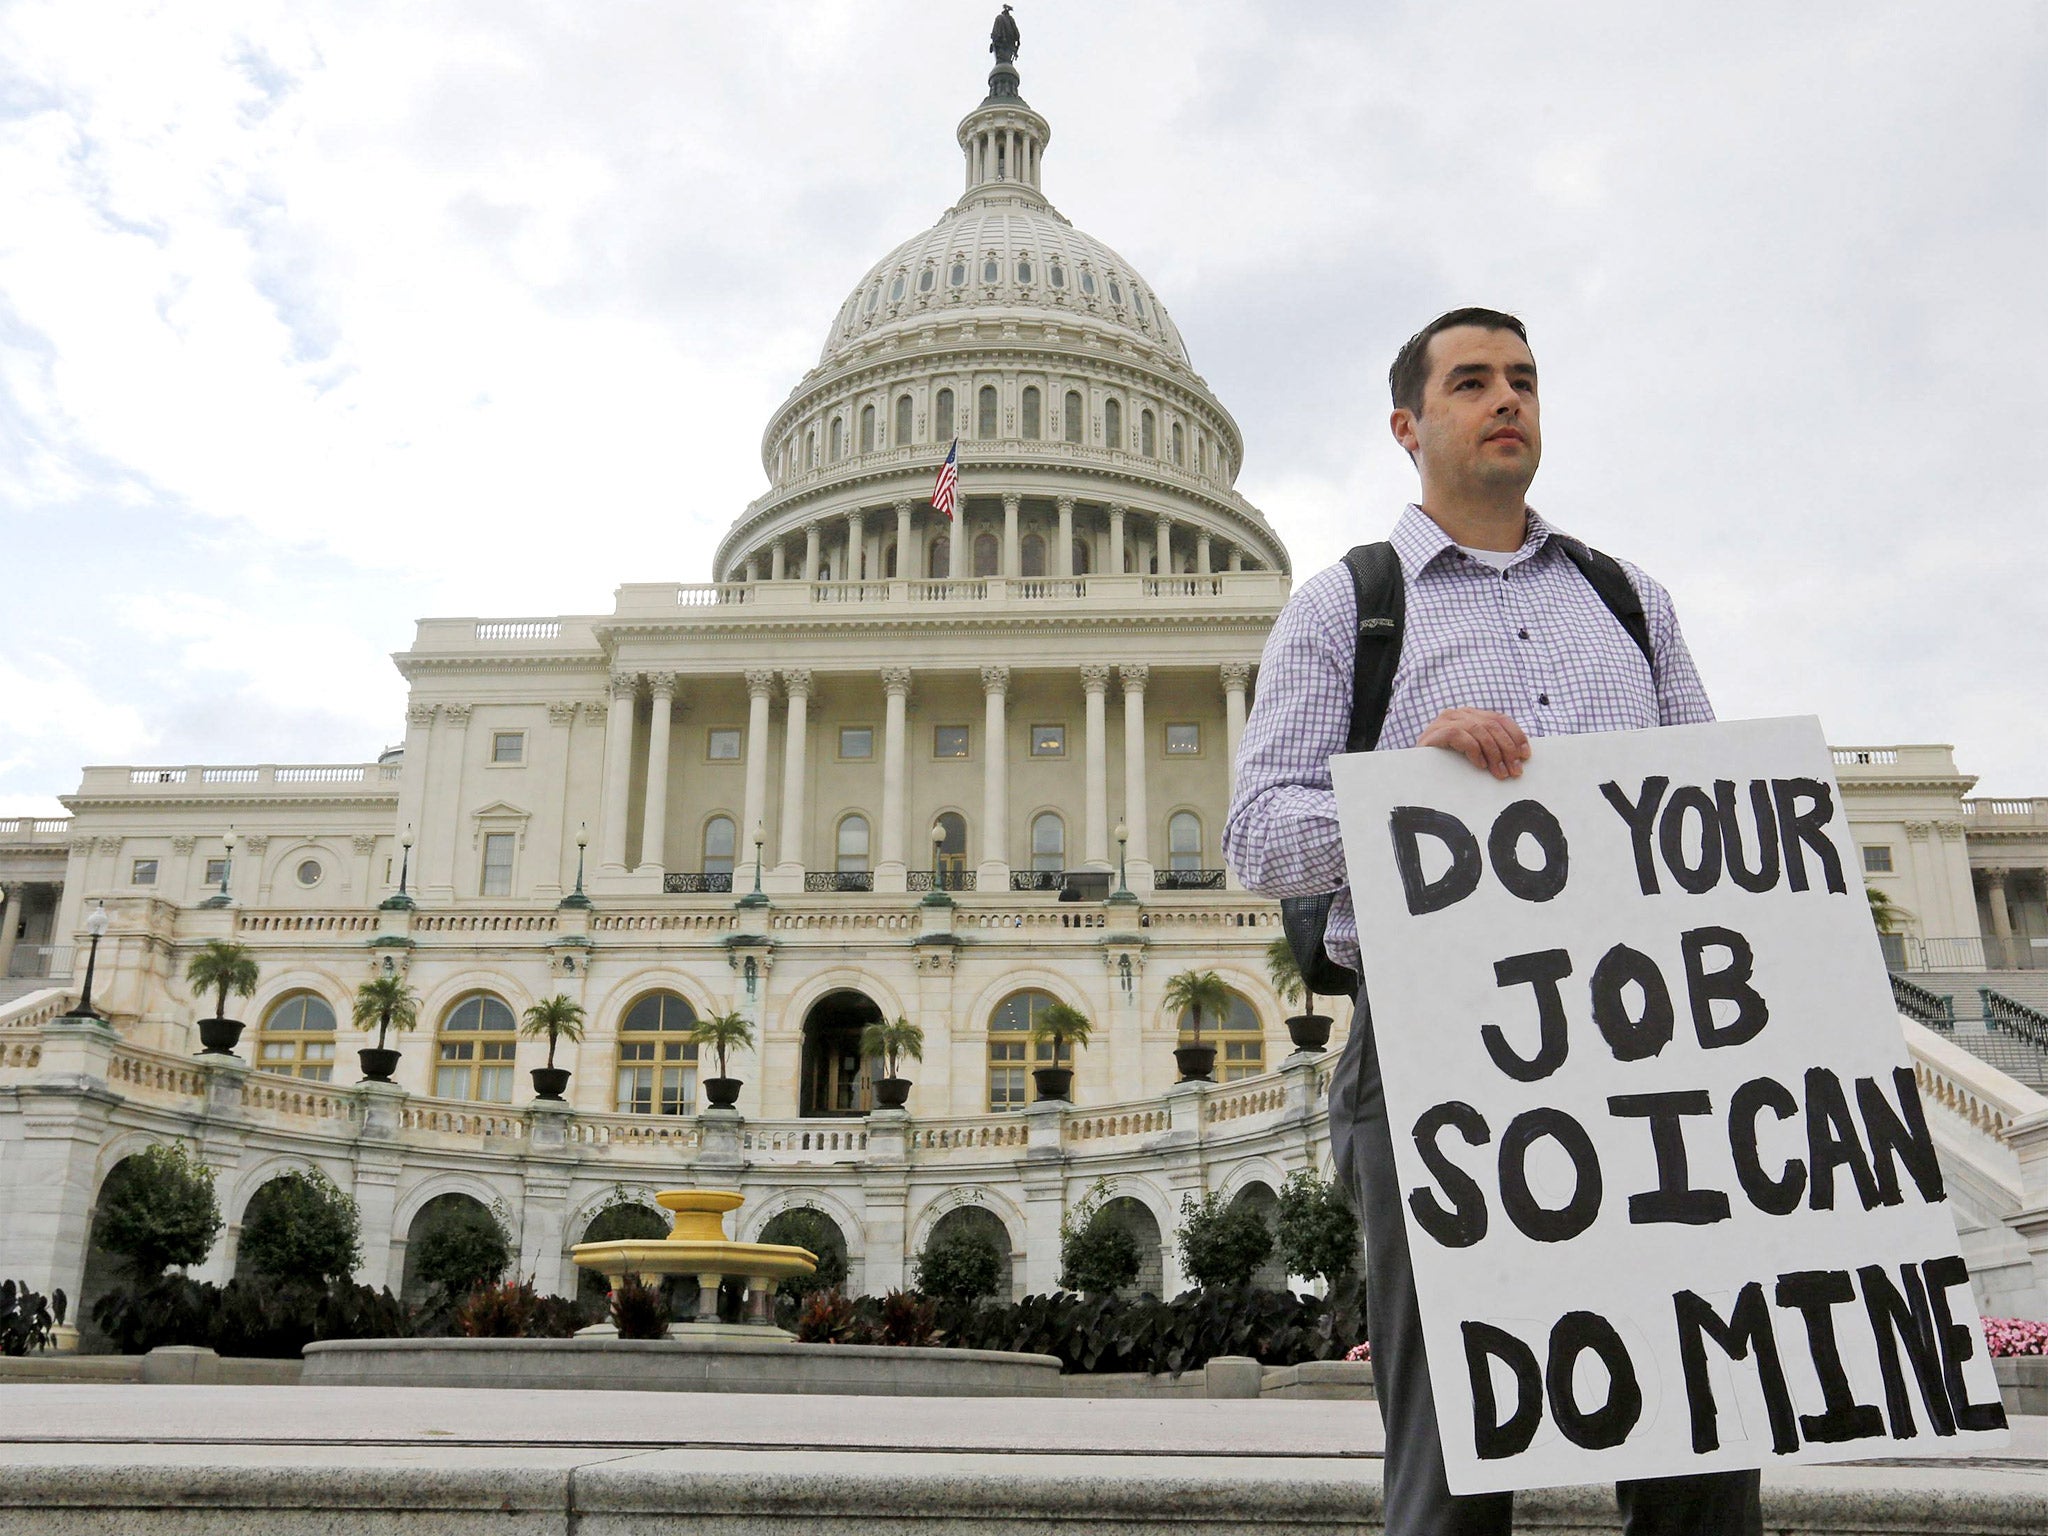 A federal employee on the steps of the US Capitol building in Washington